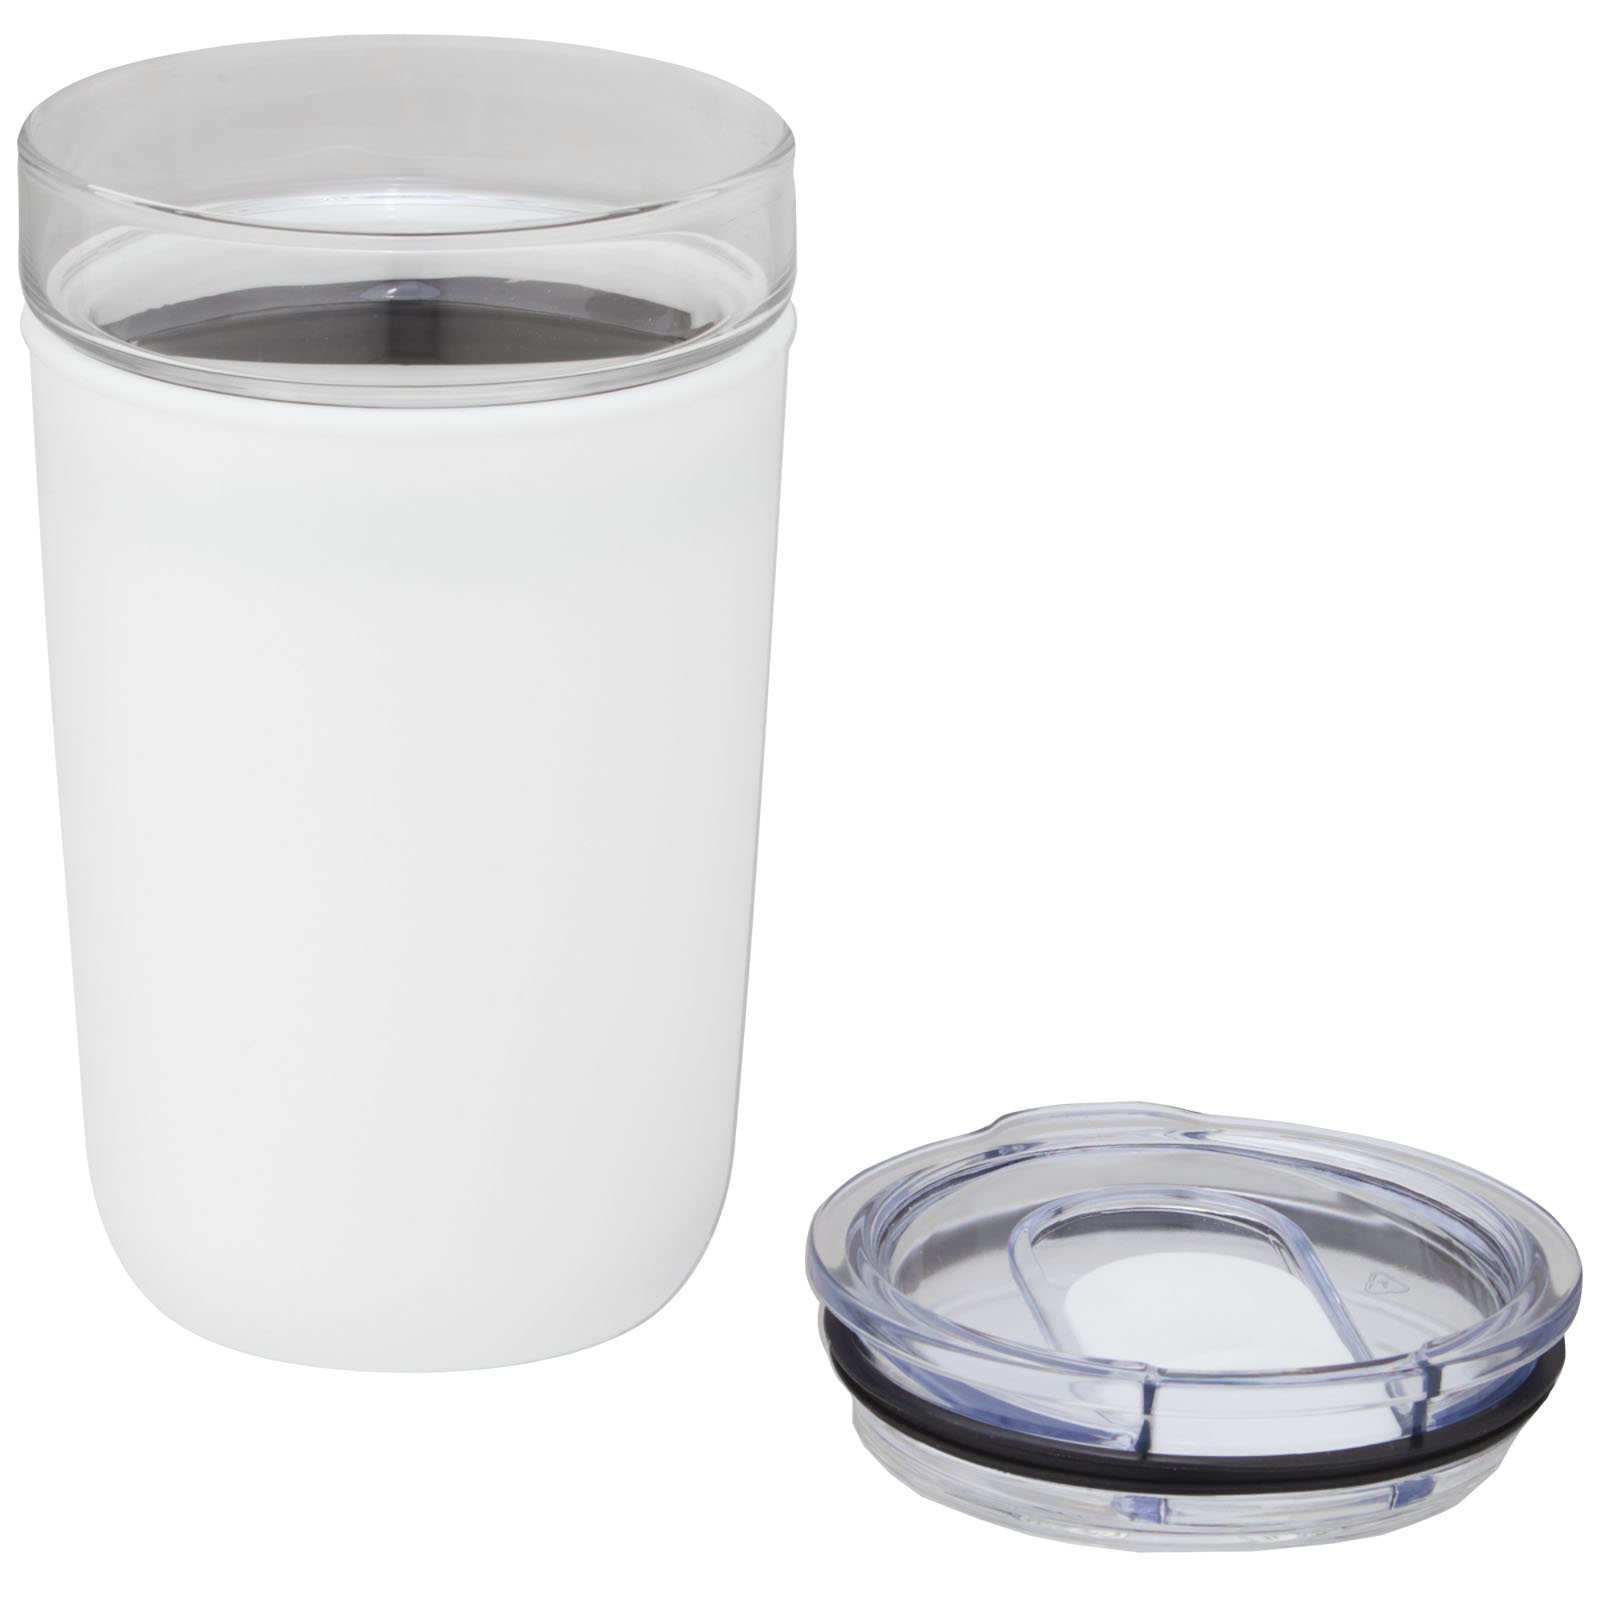 Advertising Travel mugs - Bello 420 ml glass tumbler with recycled plastic outer wall - 2